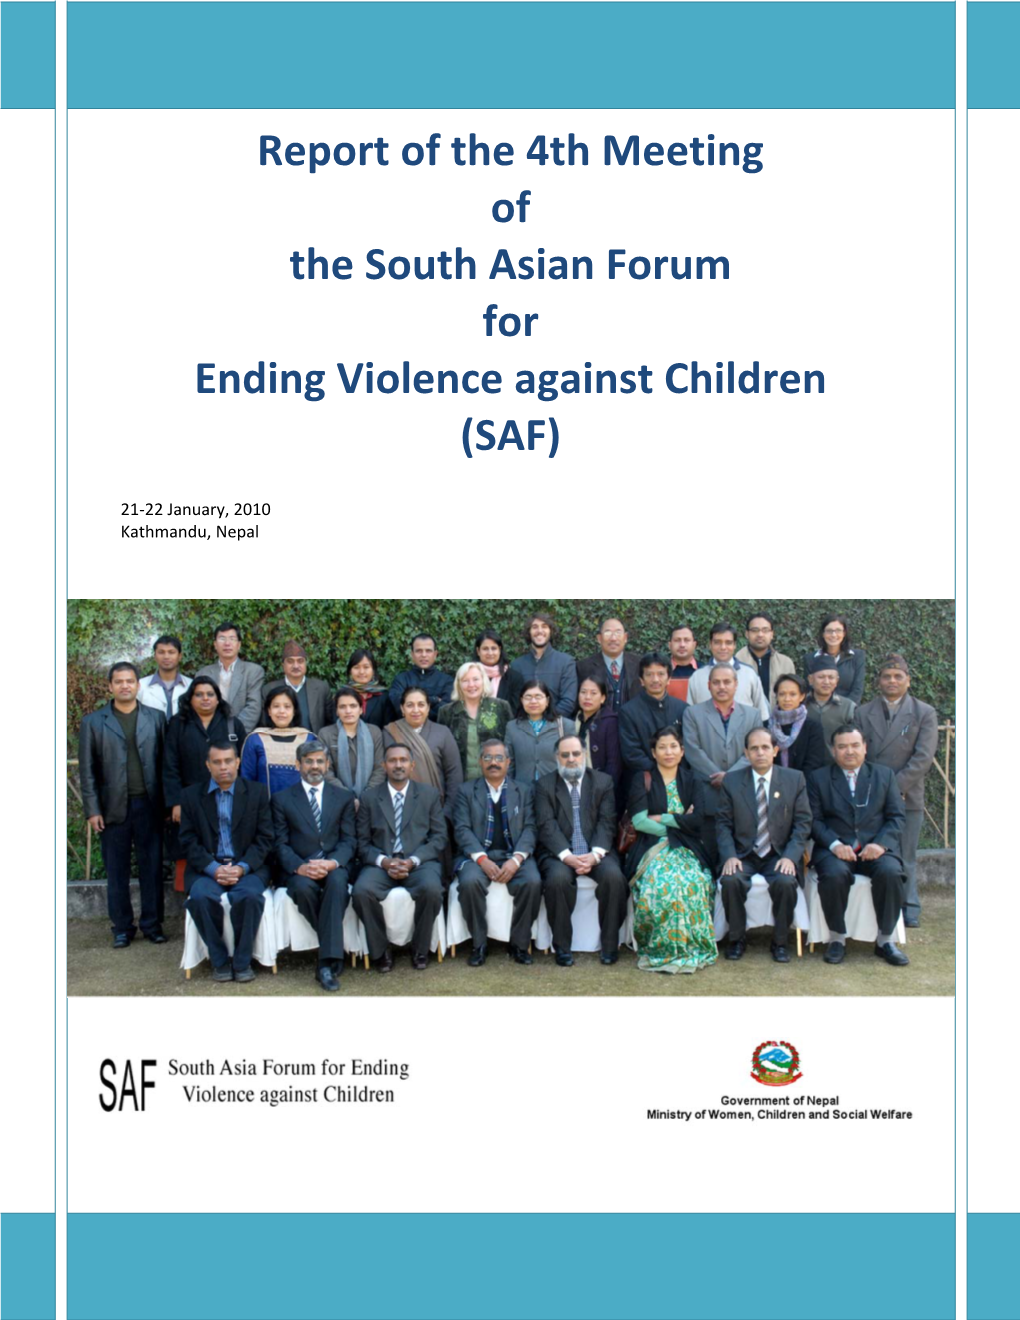 Report of the 4Th Meeting of the South Asian Forum for Ending Violence Against Children (SAF)